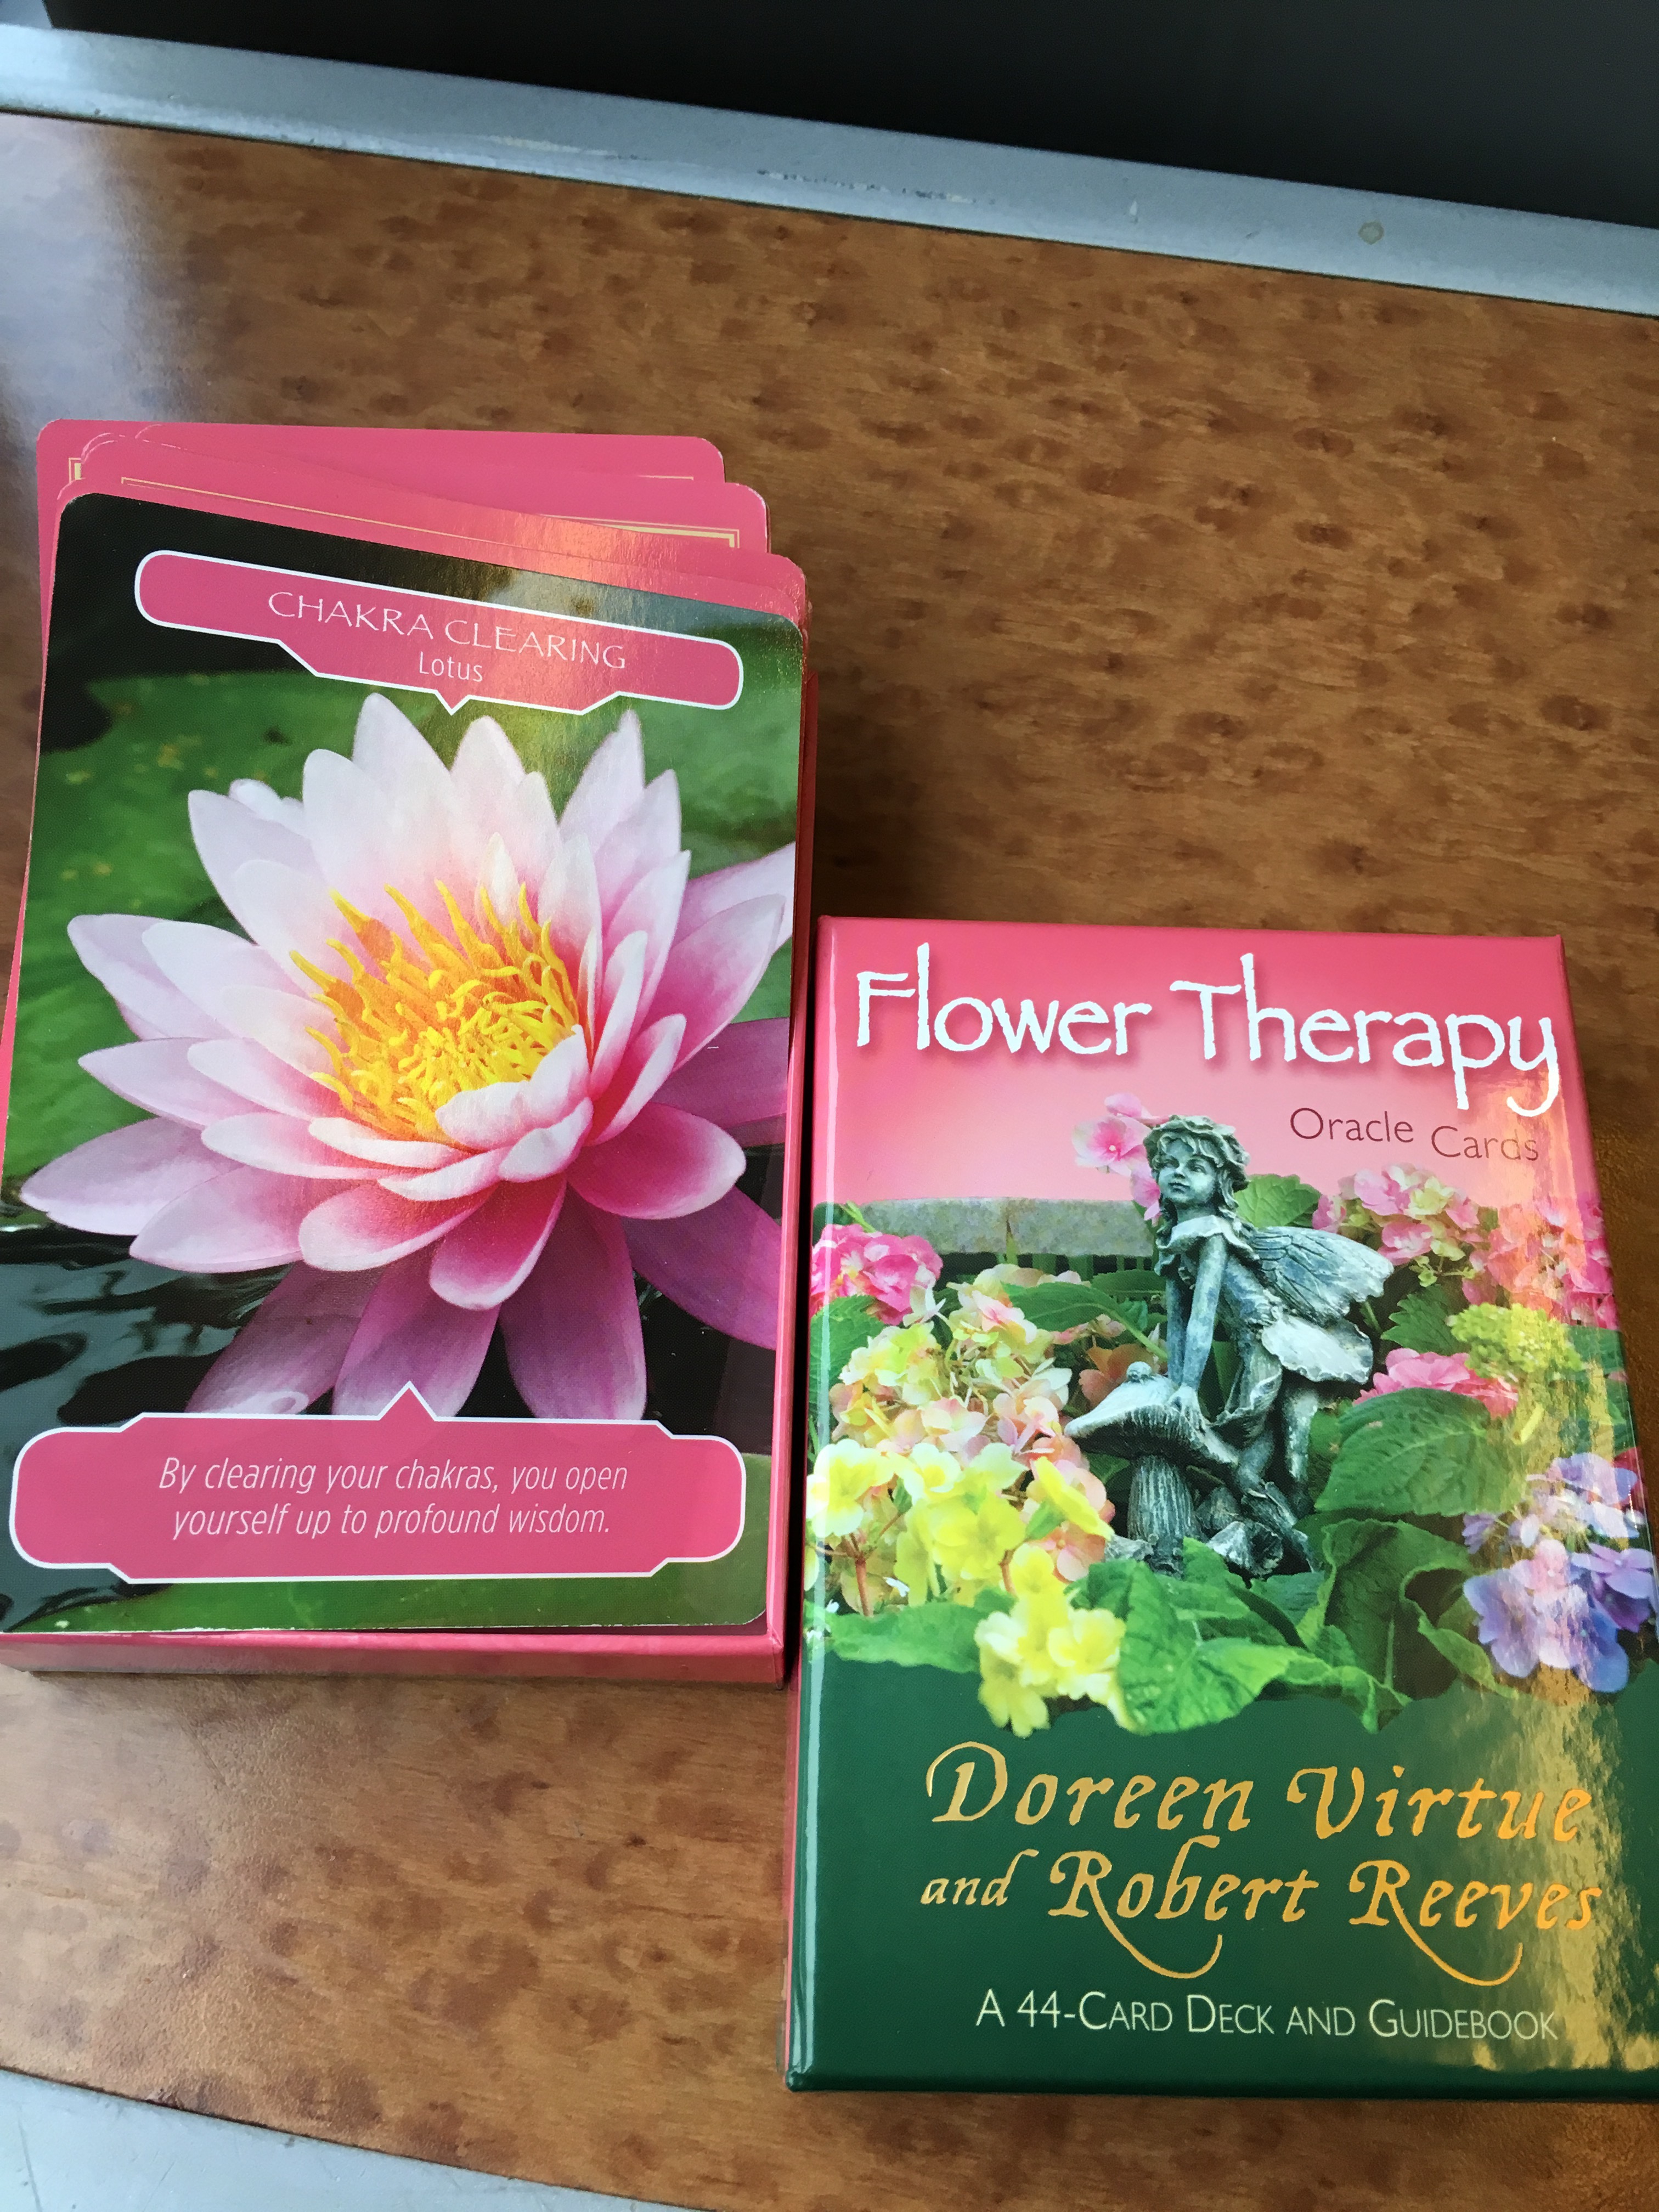 From the Flower Therapy Oracle Deck by Doreen Virtue and Robert Reeves